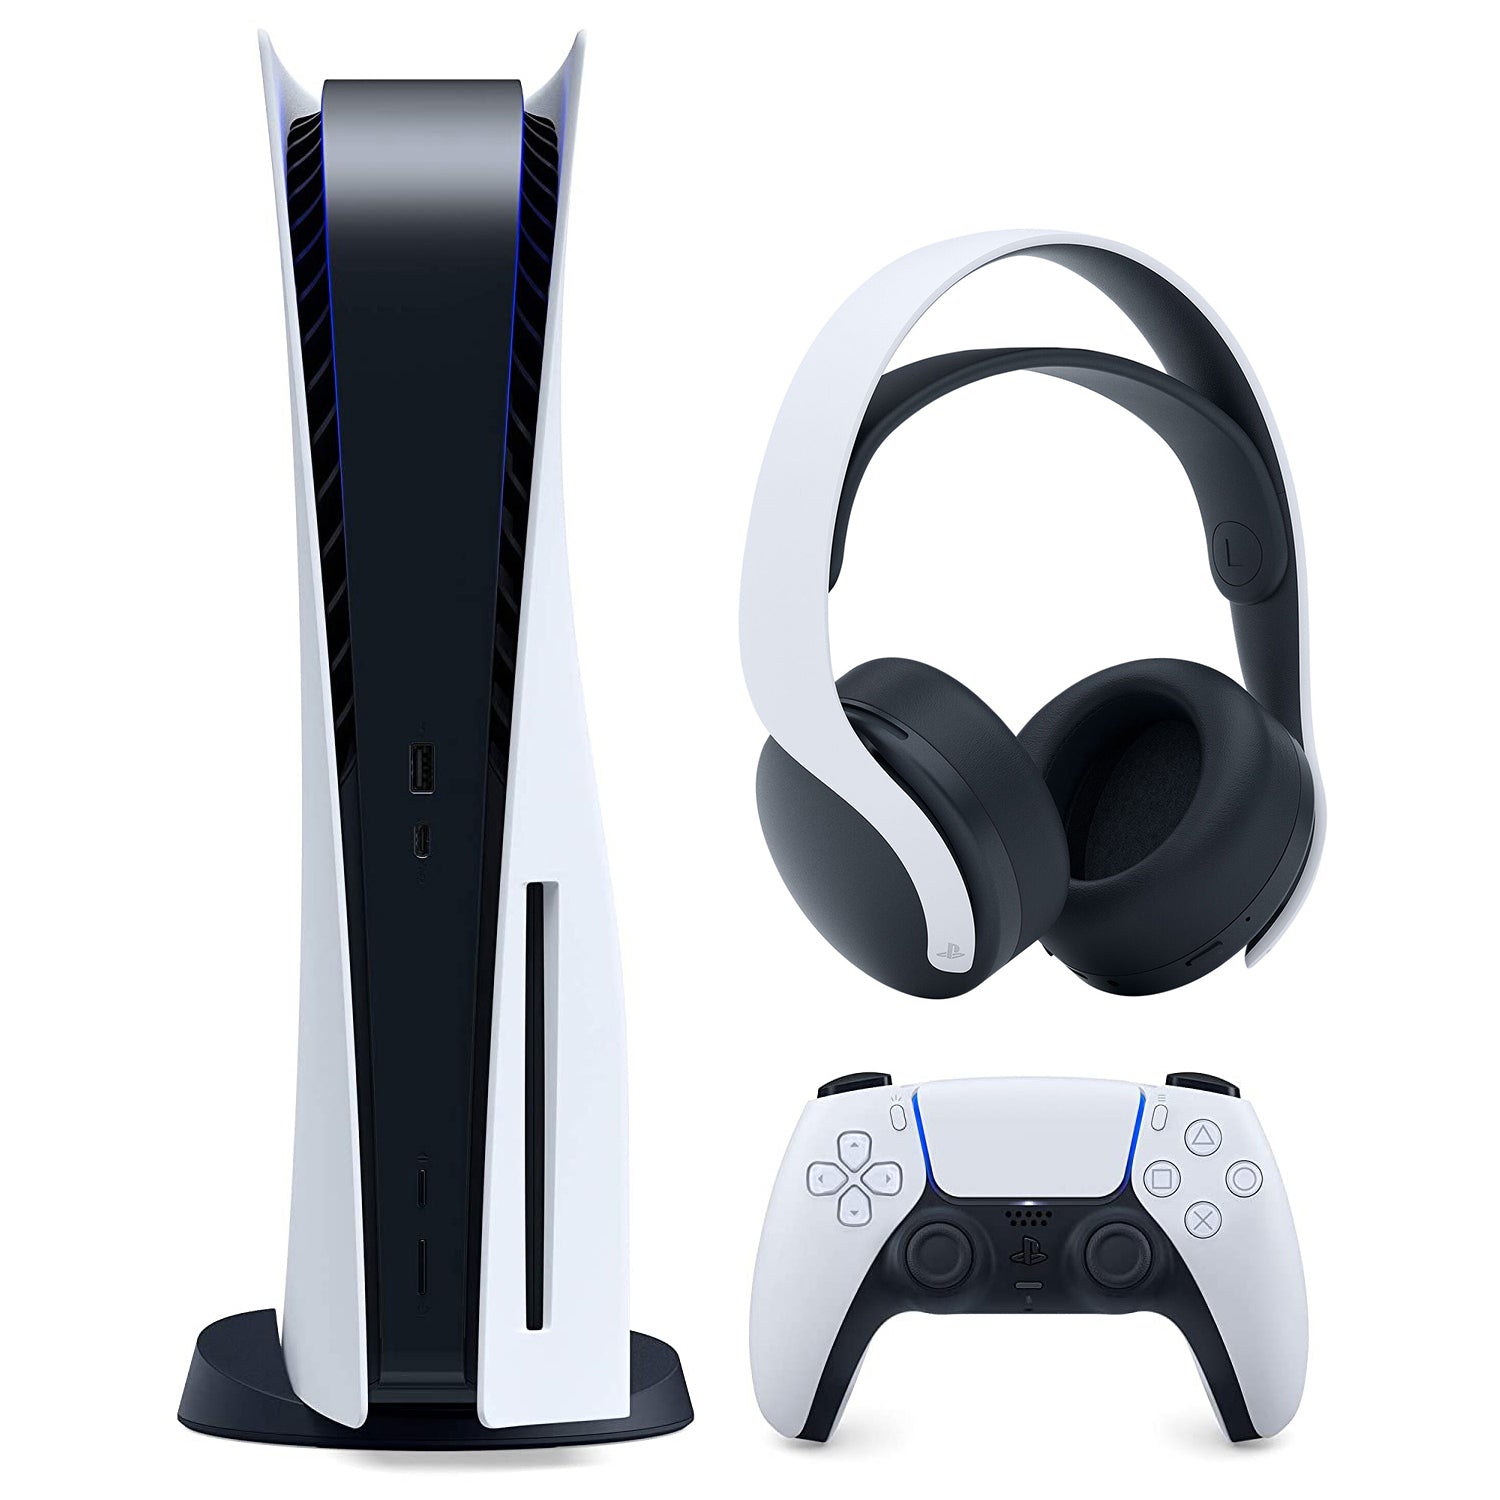 Sony Playstation 5 Disc Version (Sony PS5 Disc) with PULSE 3D Wireless Gaming Headset Bundle - White - Pro-Distributing